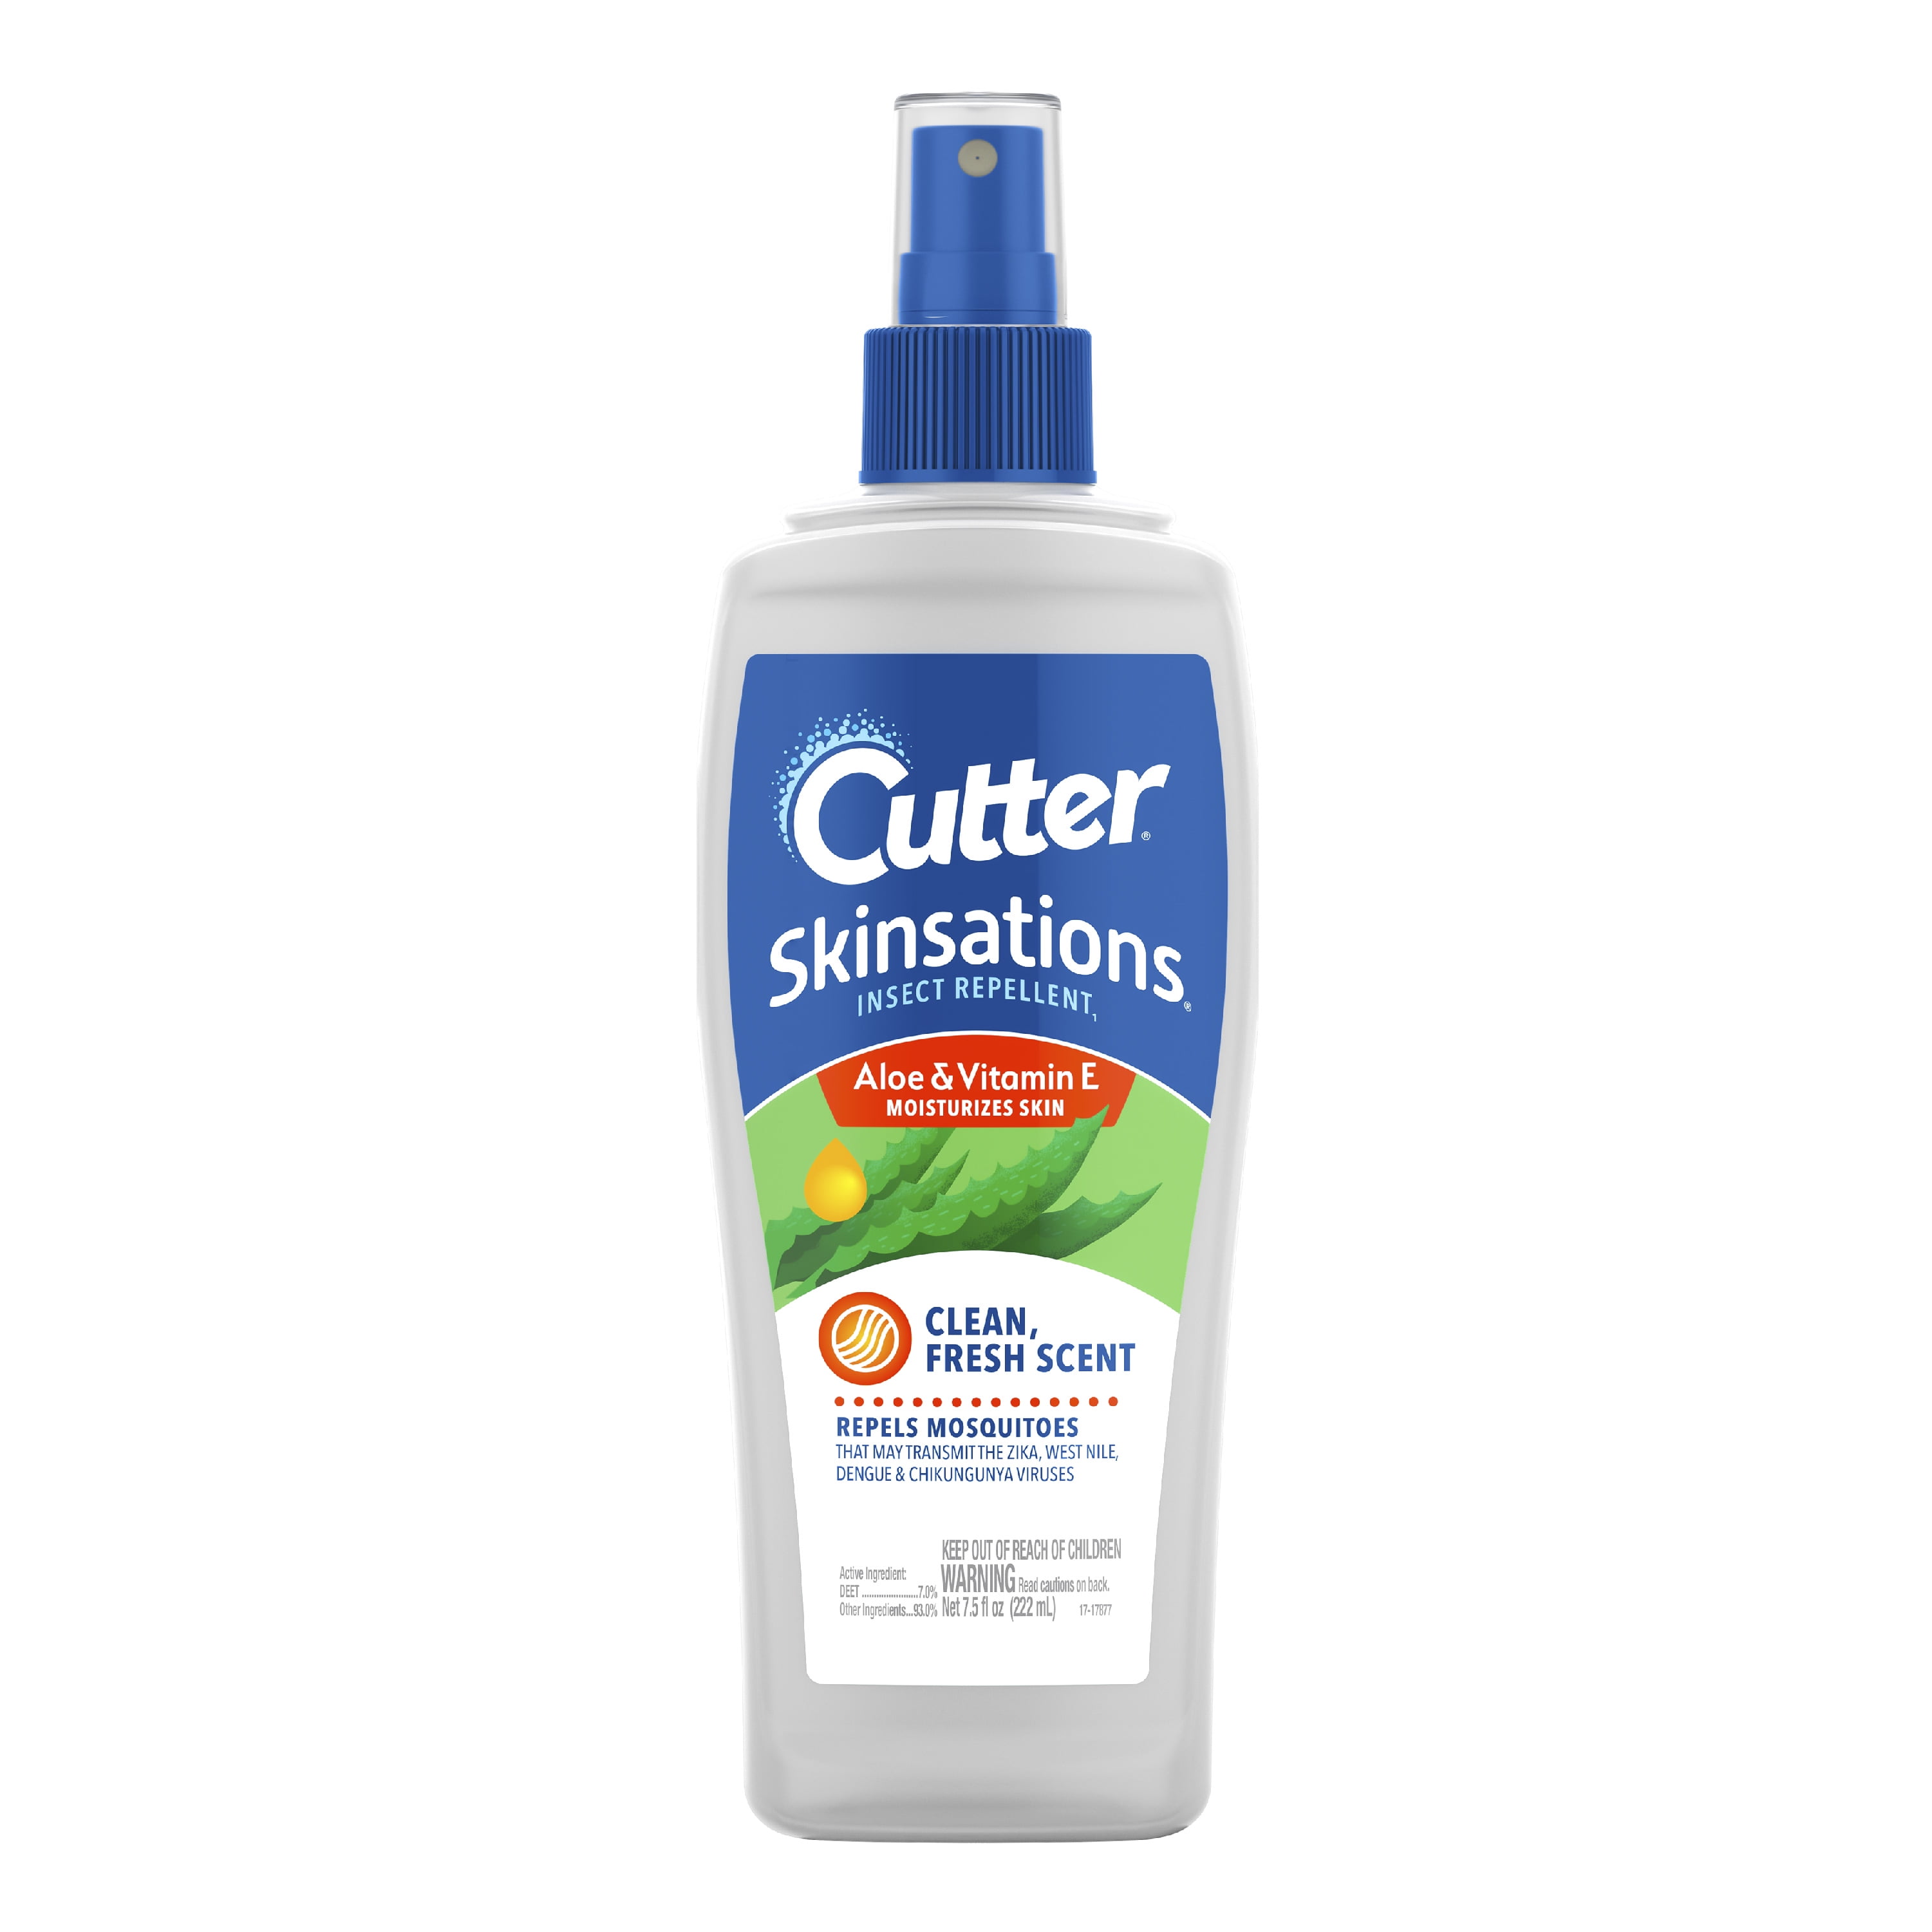 Cutter Skinsations Insect Repellent, 7.5 Ounces, Pump Spray